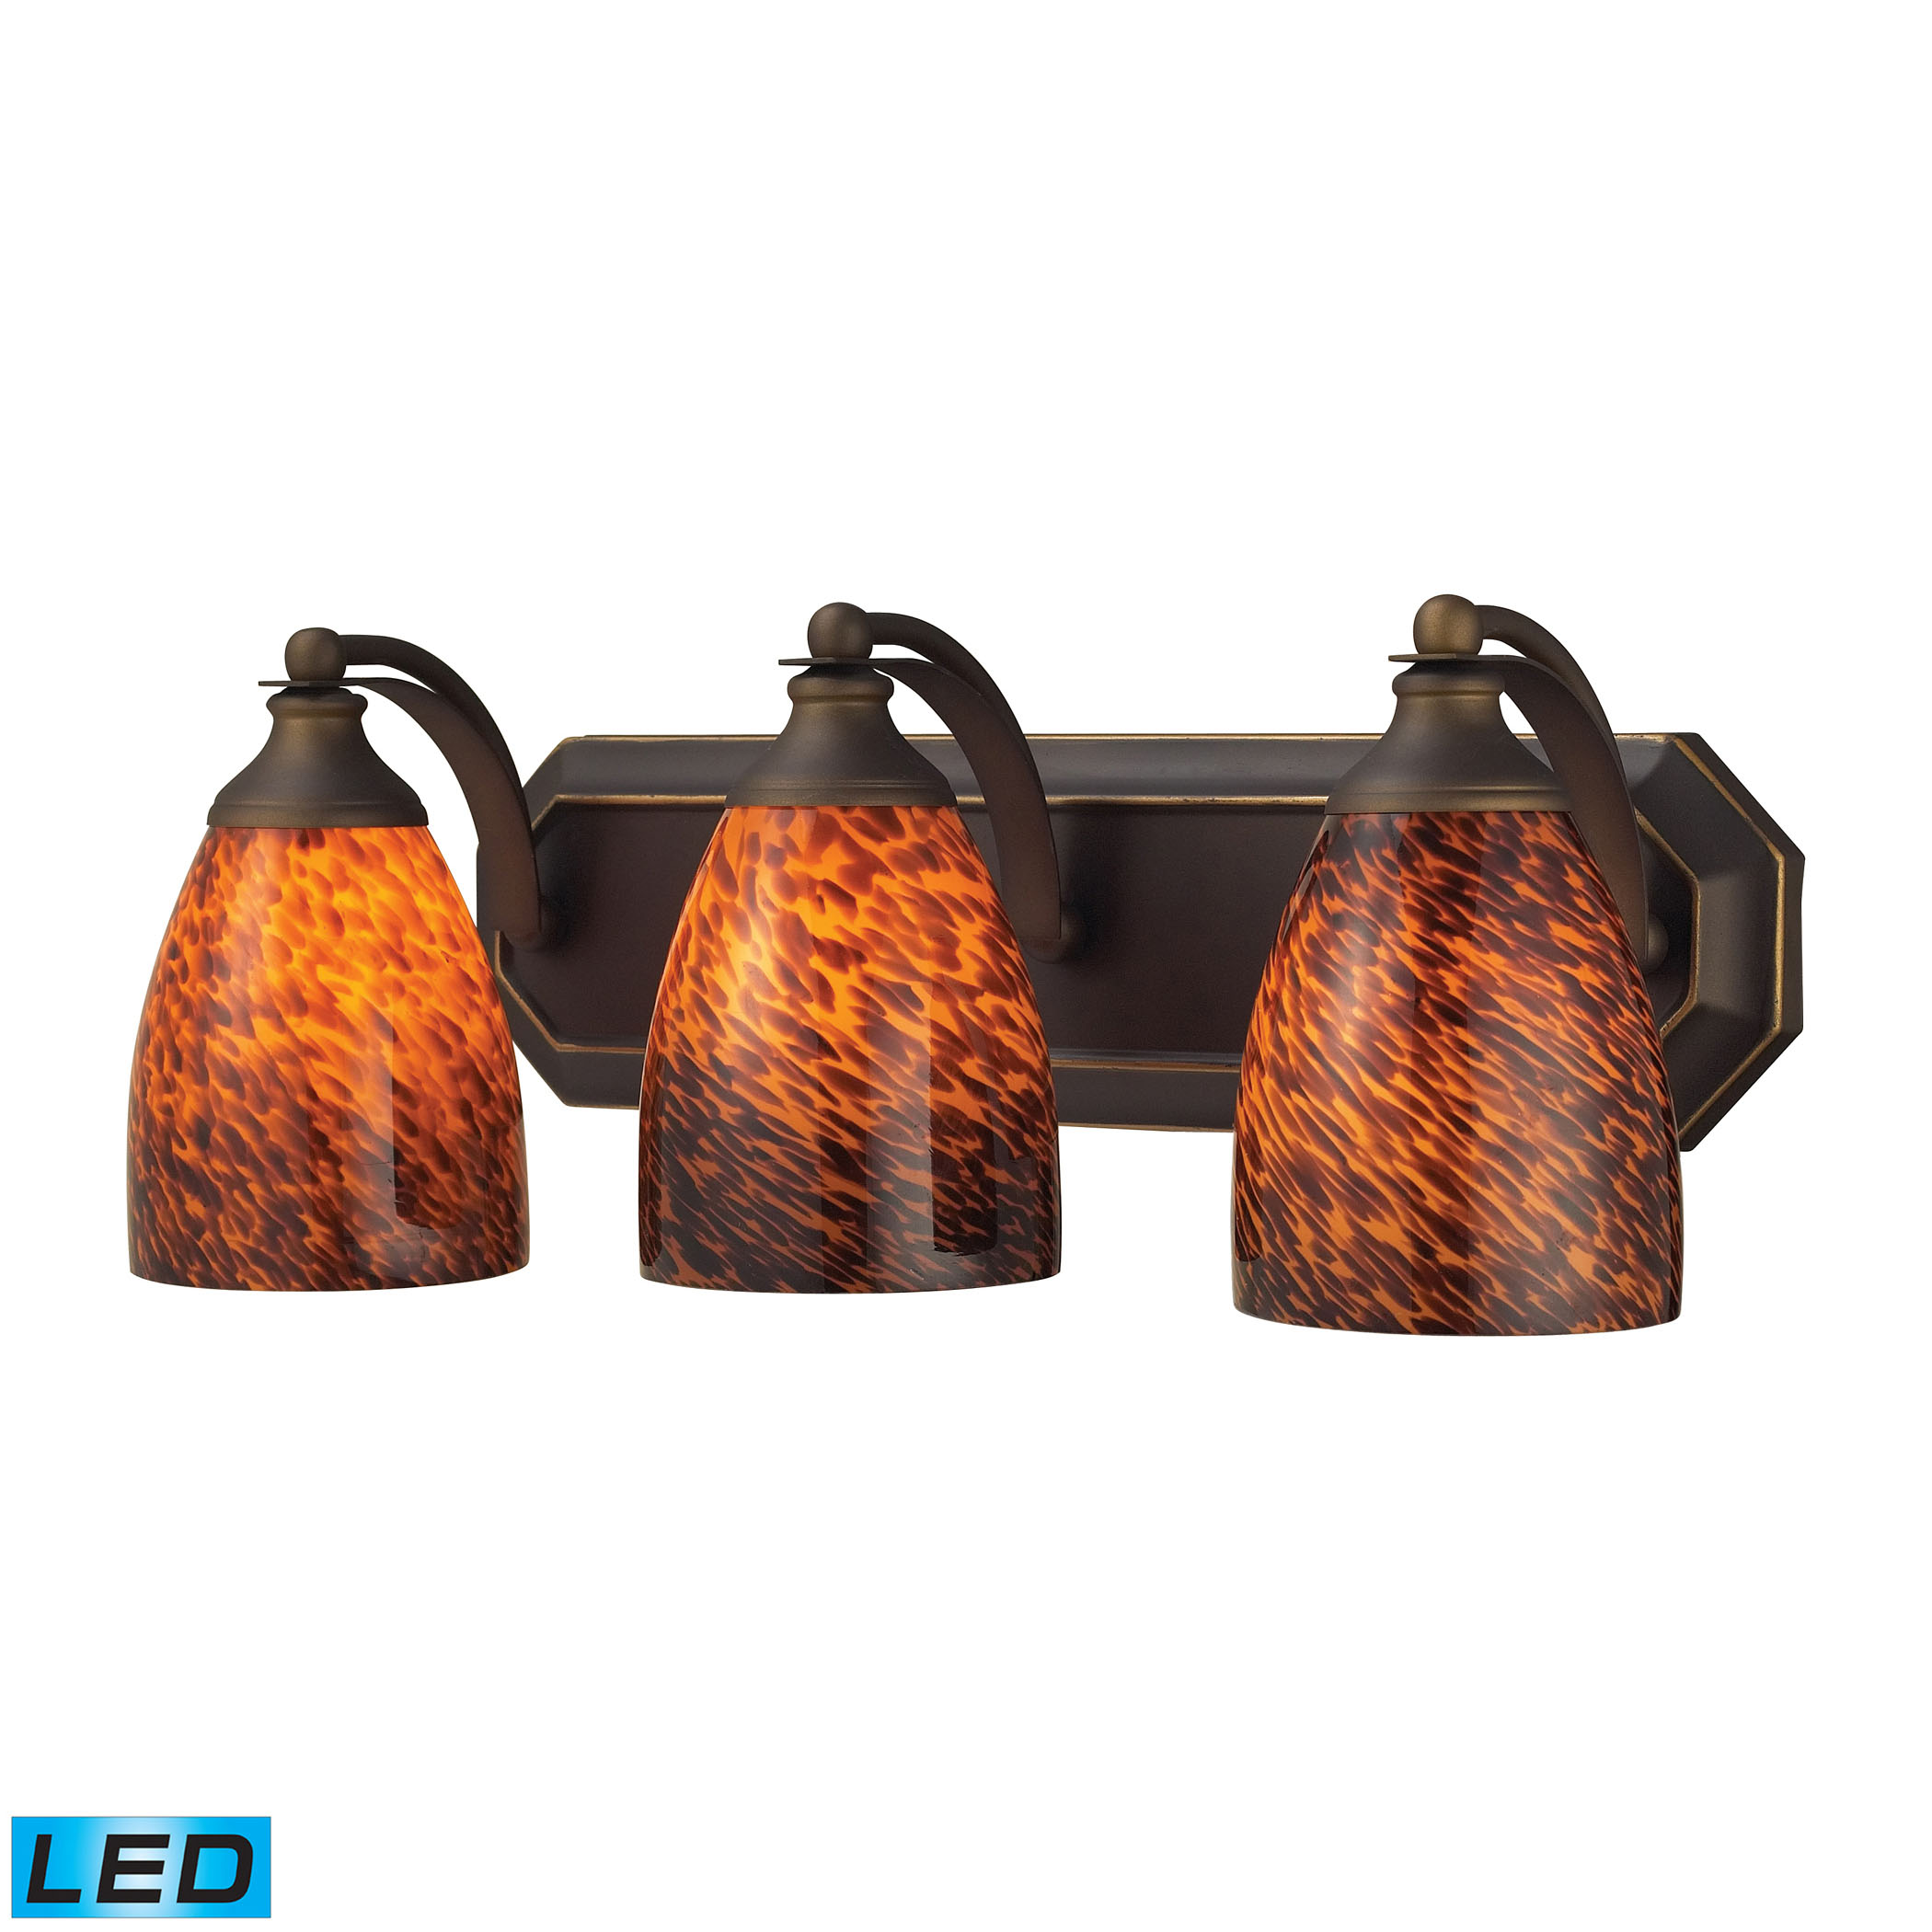 3 Light Vanity in Aged Bronze and Espresso Glass - LED, 800 Lumens (2400 Lumens Total) with Full Scale